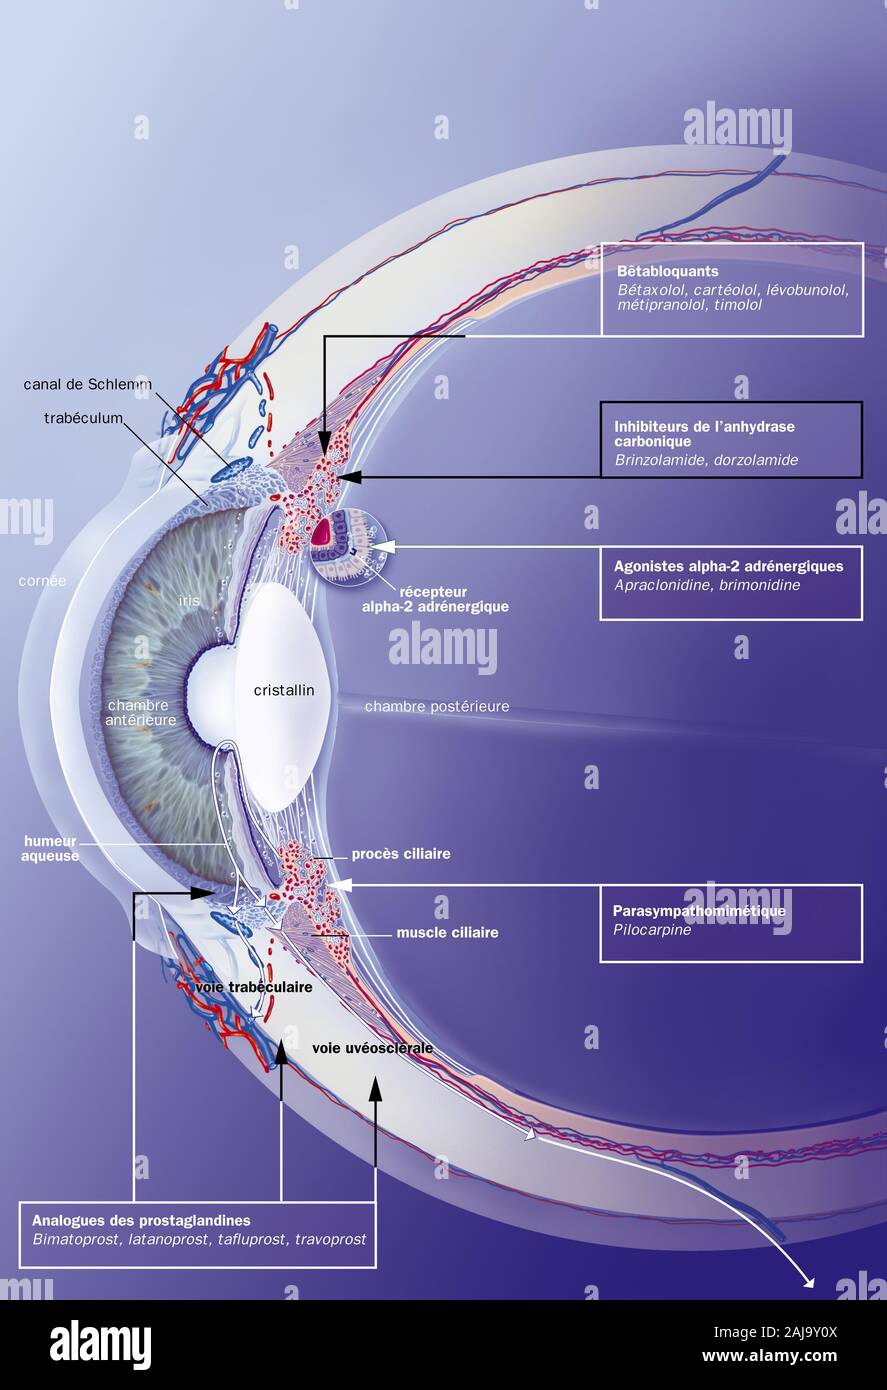 Schlemm canal, trabeculum, aqueous humor, treatments. Sagittal section of the eye with, behind the cornea, the anterior chamber, the iris and the crys Stock Photo